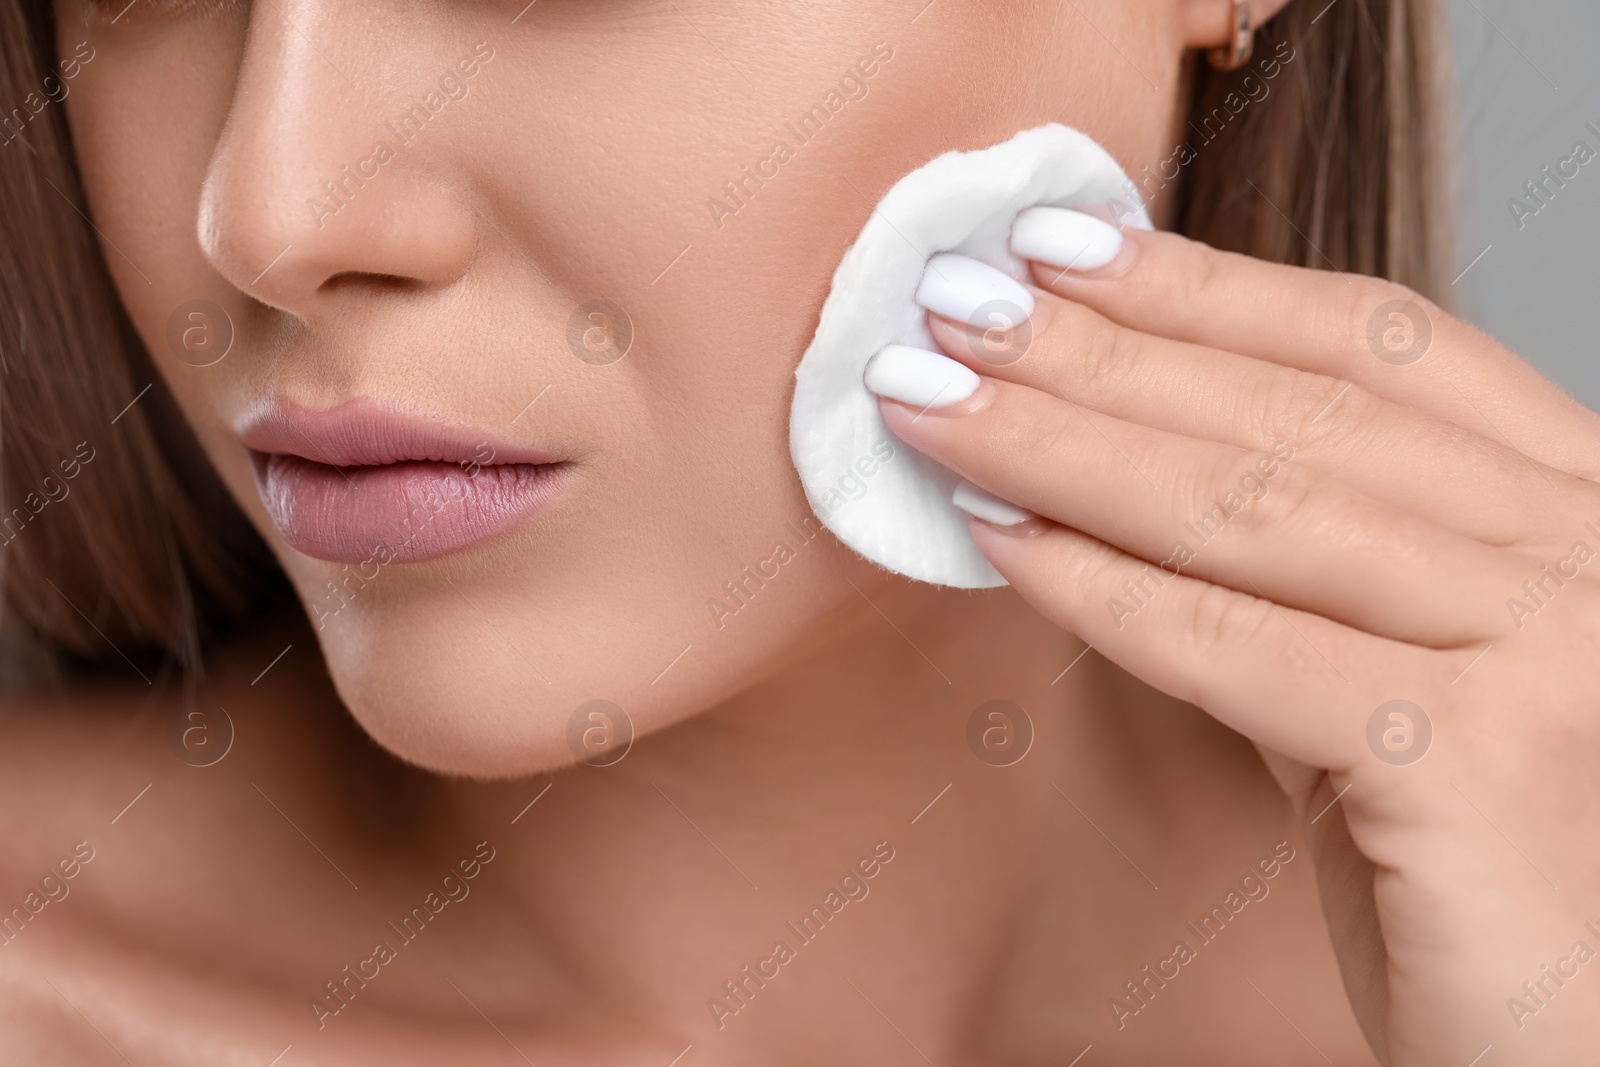 Photo of Woman removing makeup with cotton pad, closeup